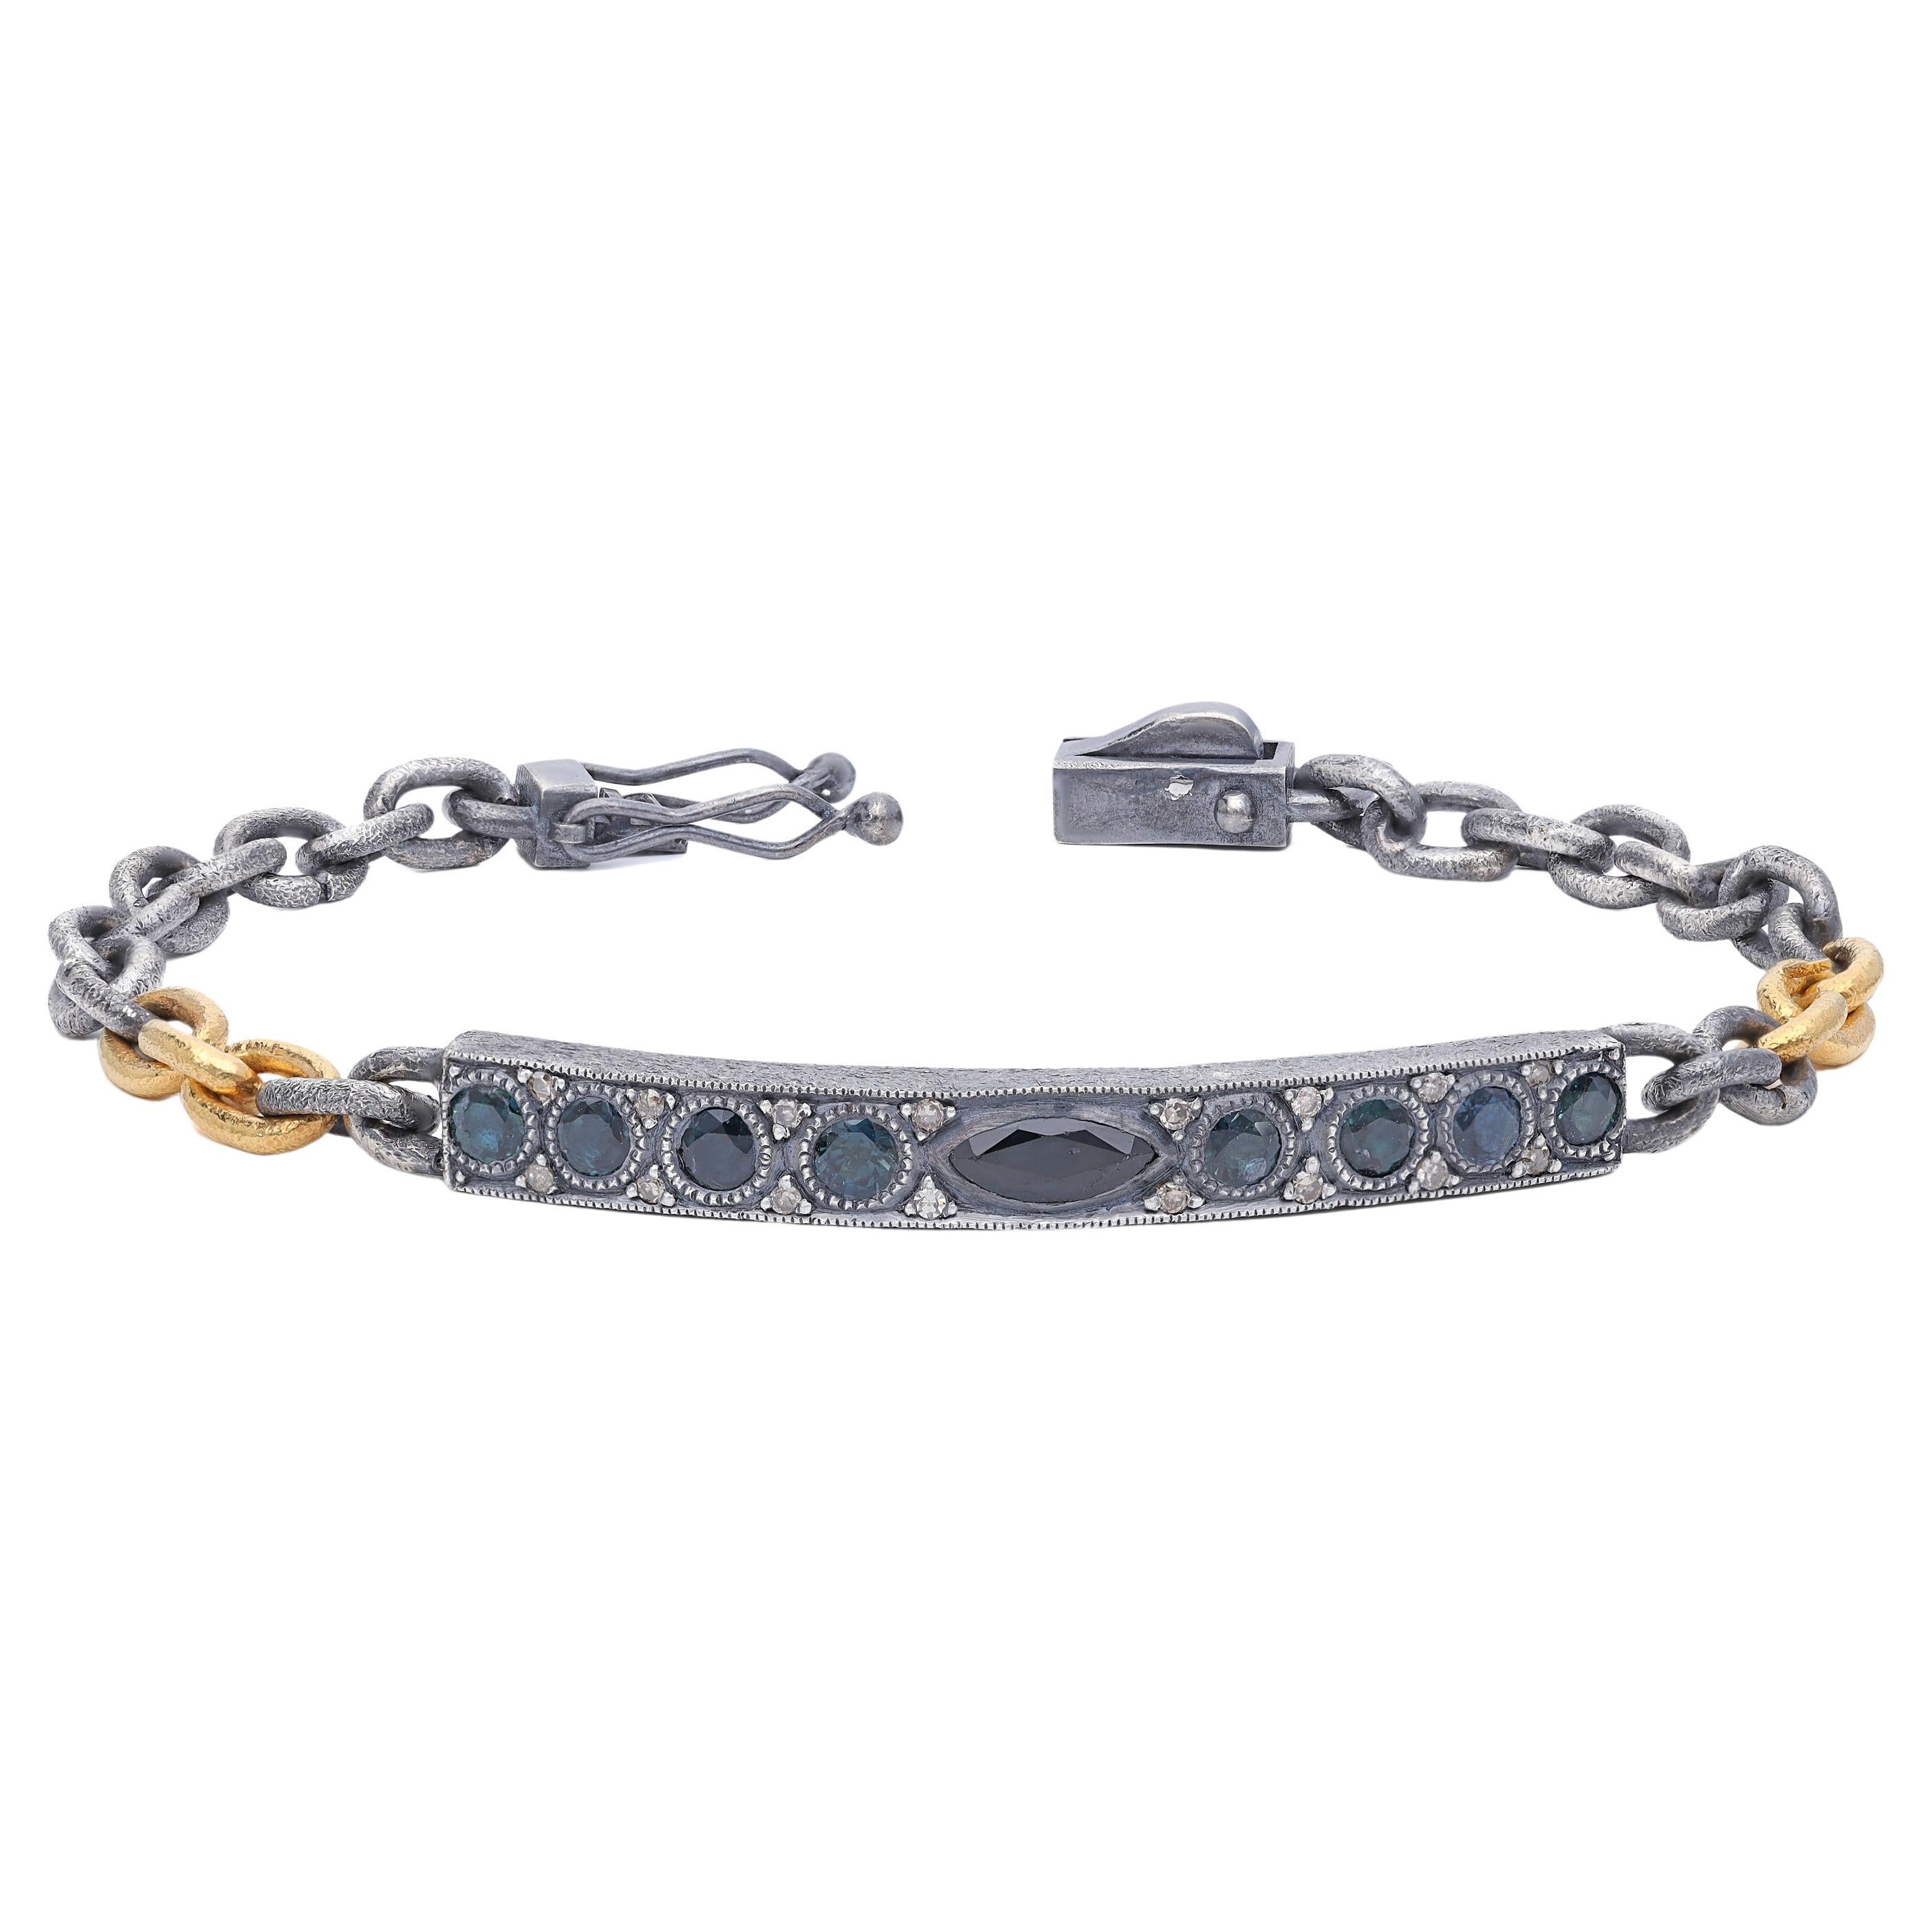  Oxidised Silver and 24k Gold Micron Plated Tag Chain Bracelet with Sapphire